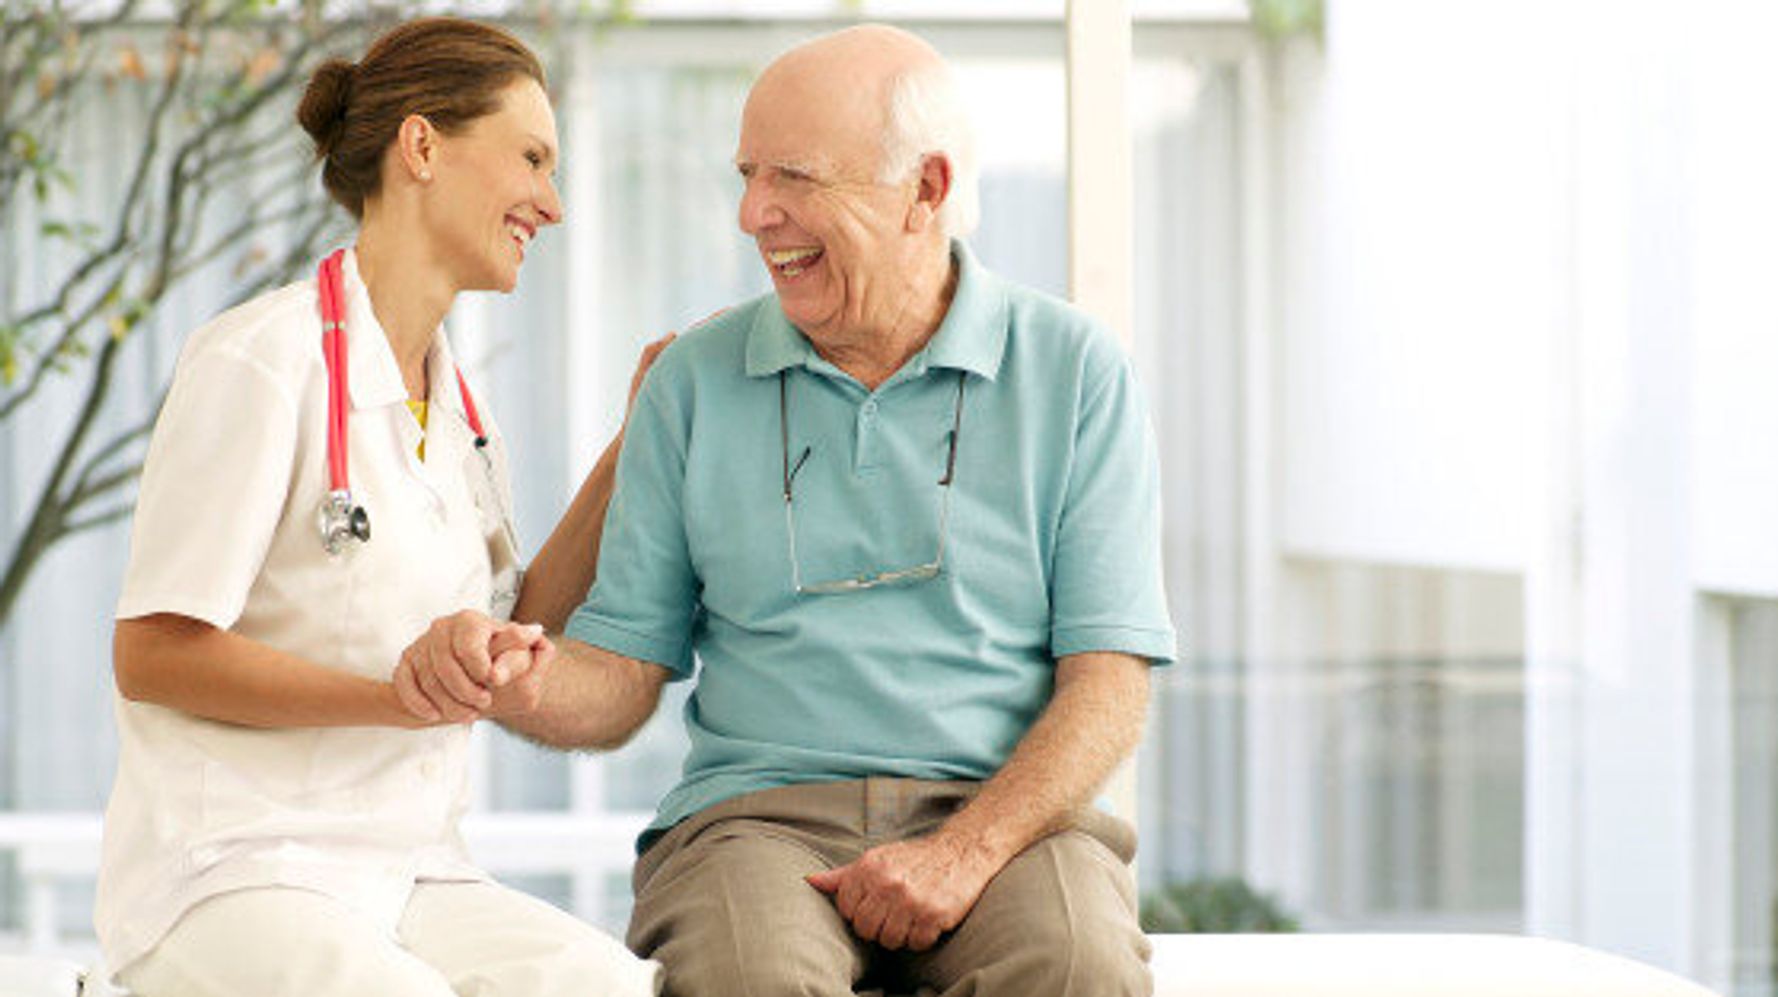 How to Build Strong Relationships Between Seniors and Caregivers